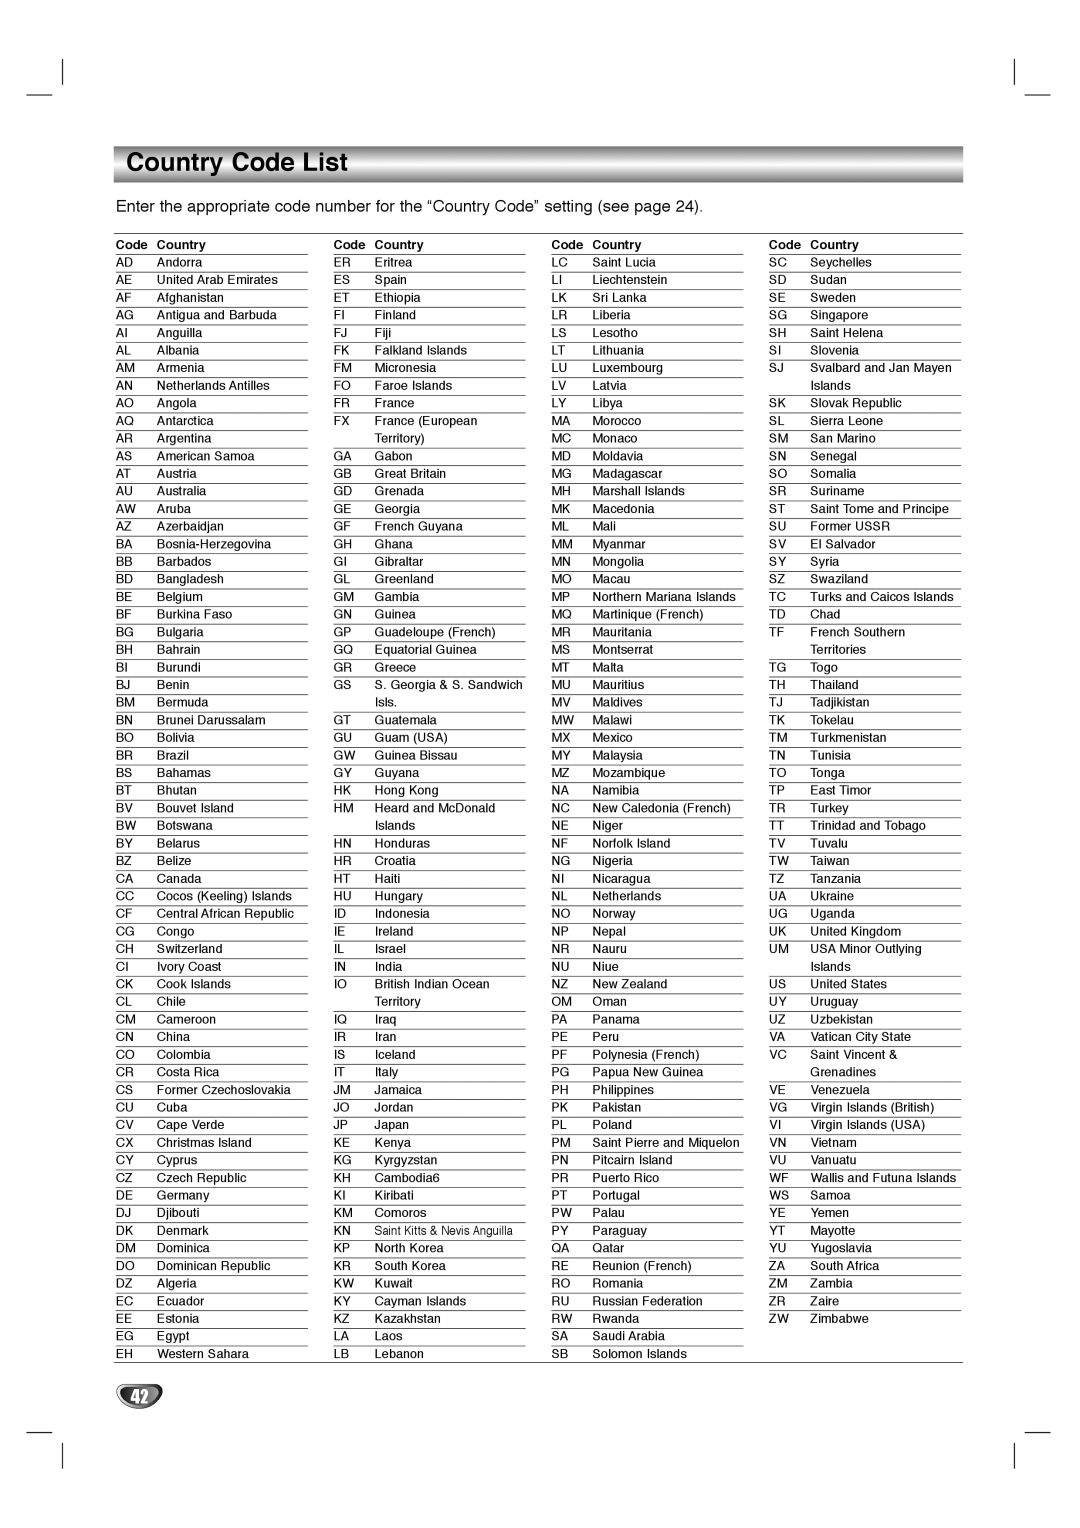 Dolby Laboratories HT2030 manual Country Code List 